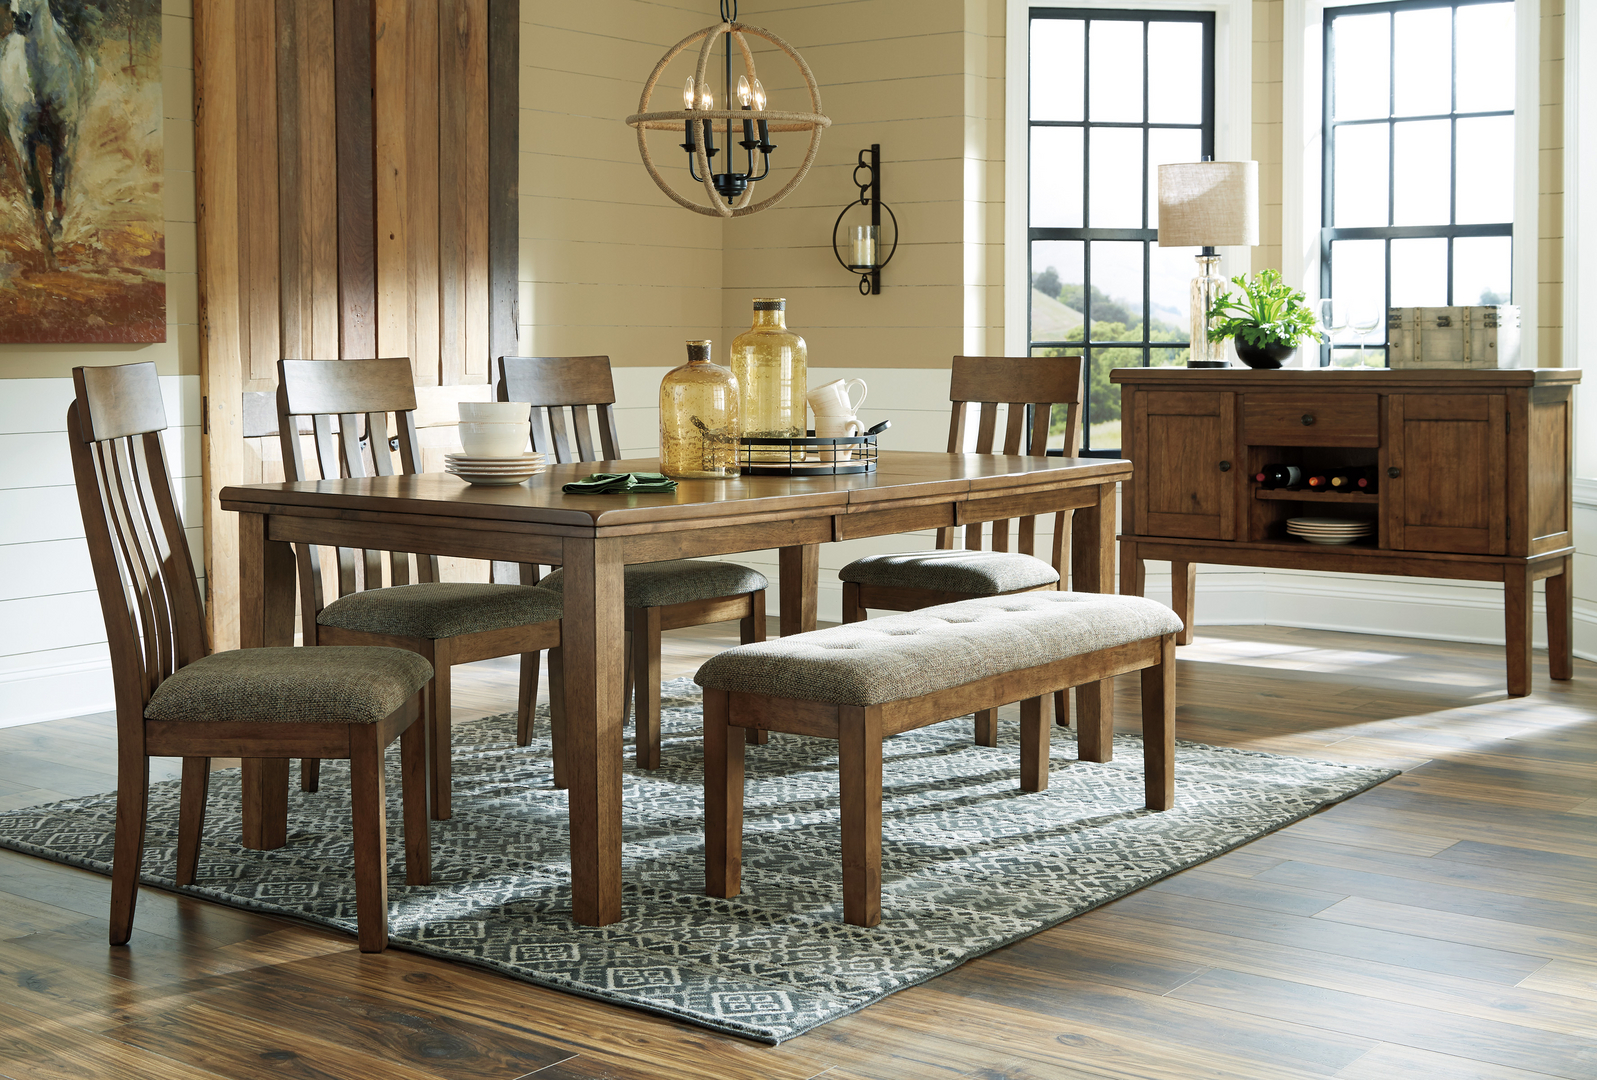 A wooden dining area set